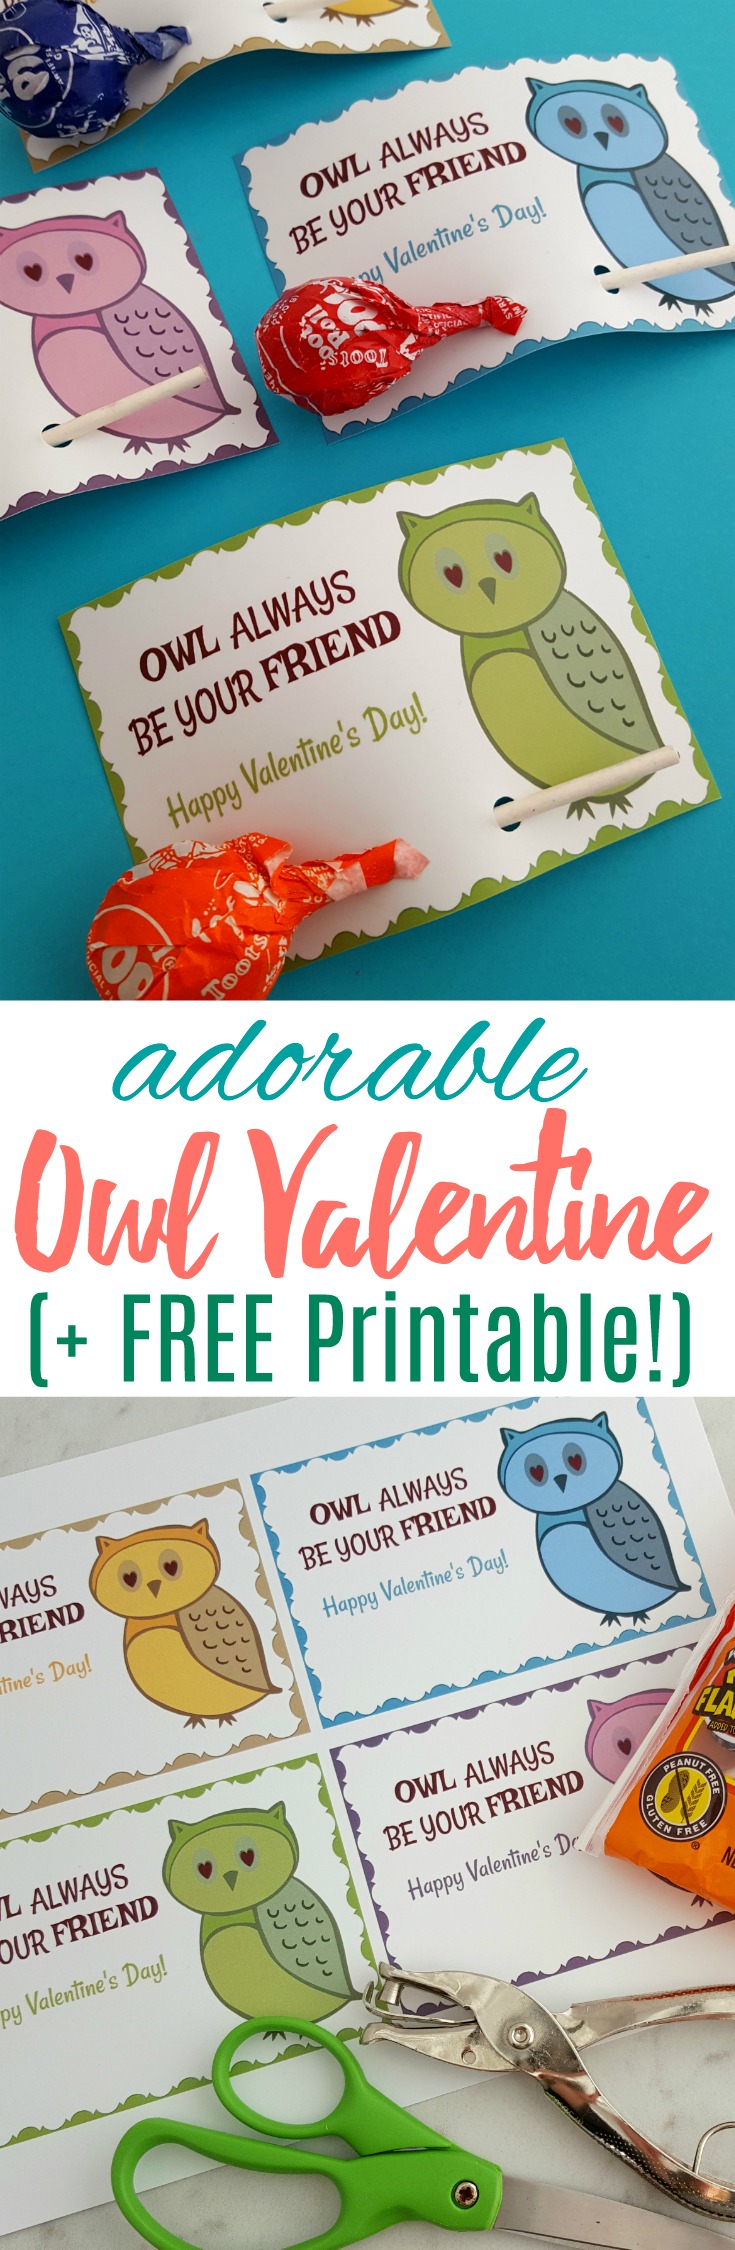 Grab these free Owl printable Valentine's Cards and attach a tootsie roll pop - they'll be a big hit for your child's next Valentine's party!